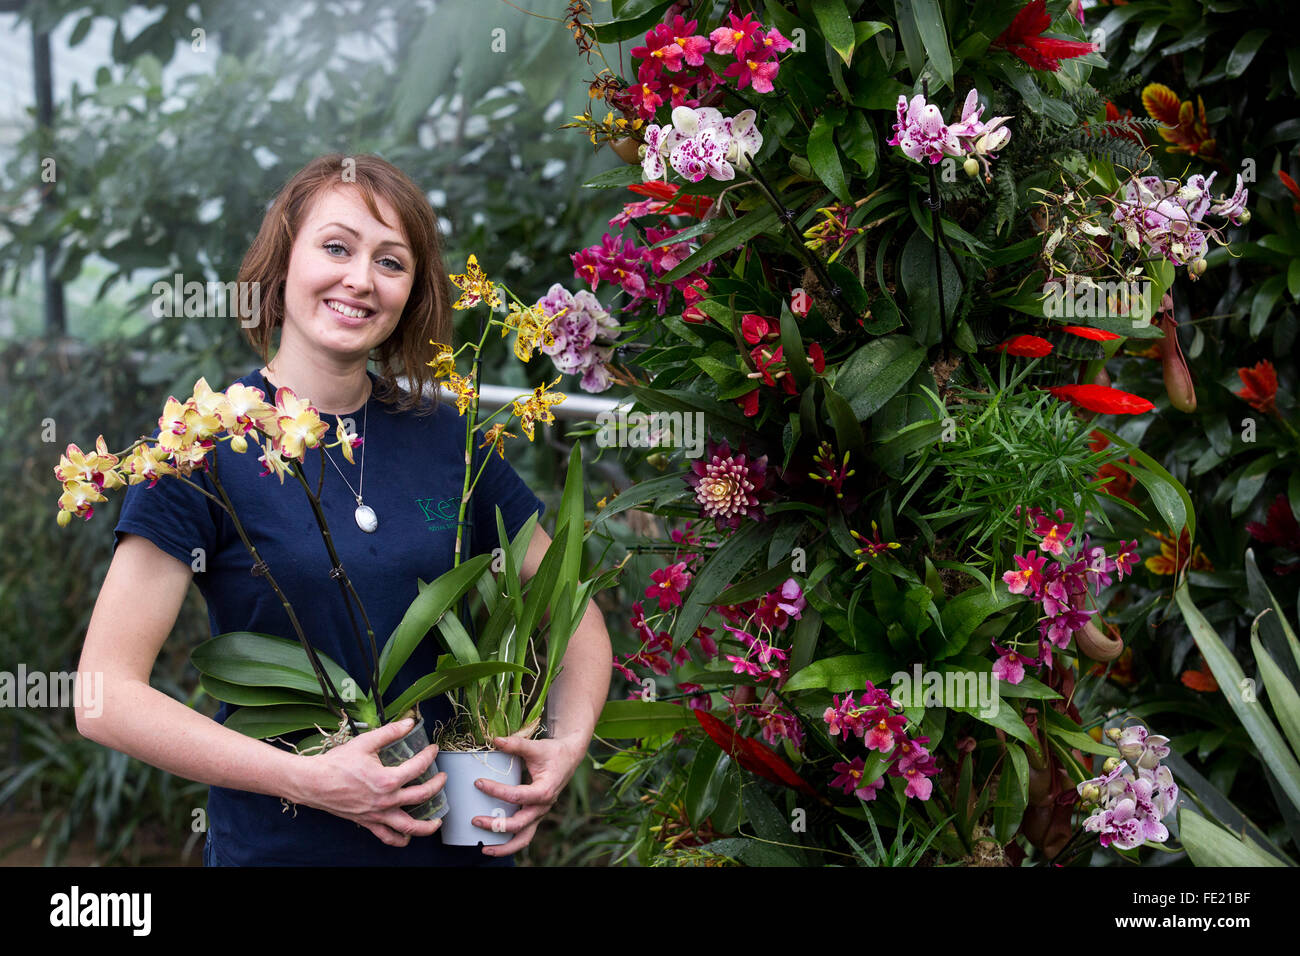 London, UK. 4 February 2016. Horticulturist Hannah Button poses with plants at the annual Orchid Festival in the Princess of Wales Conservatory at Kew Gardens. In 2016 Kew celebrates with a spectacular carnival of dazzling Brazilian colours and showcases thousands of Orchids, Bromeliads and other tropical plants. Open from 6 February to 6 March 2016. Credit:  Vibrant Pictures/Alamy Live News Stock Photo